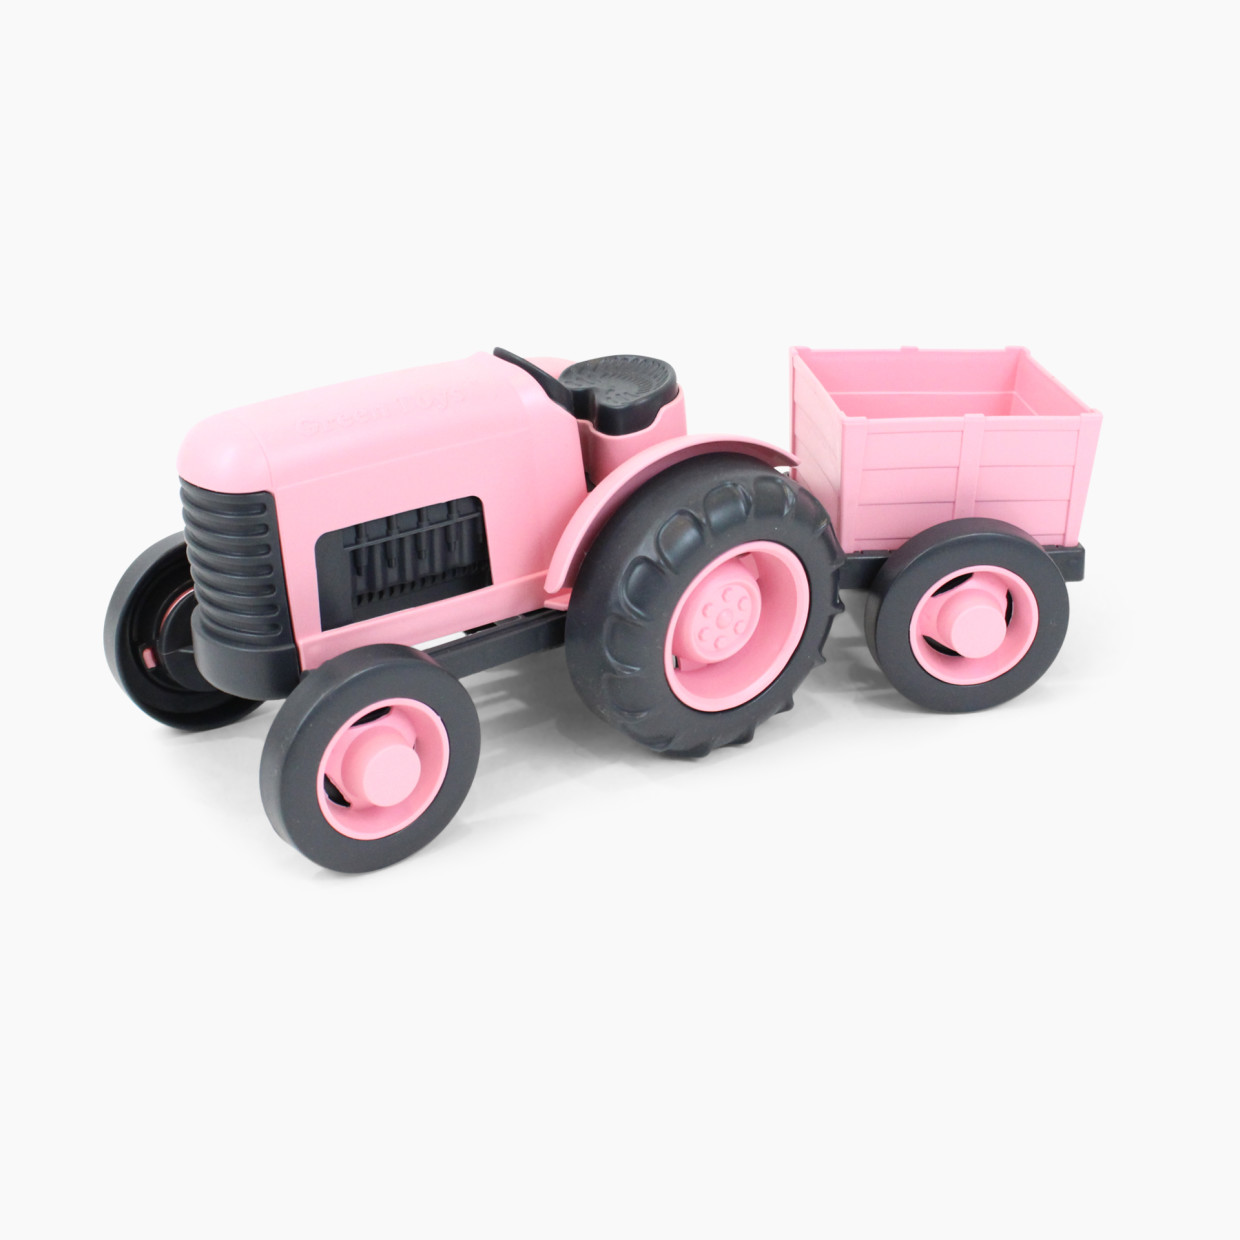 Green Toys Tractor - Pink.